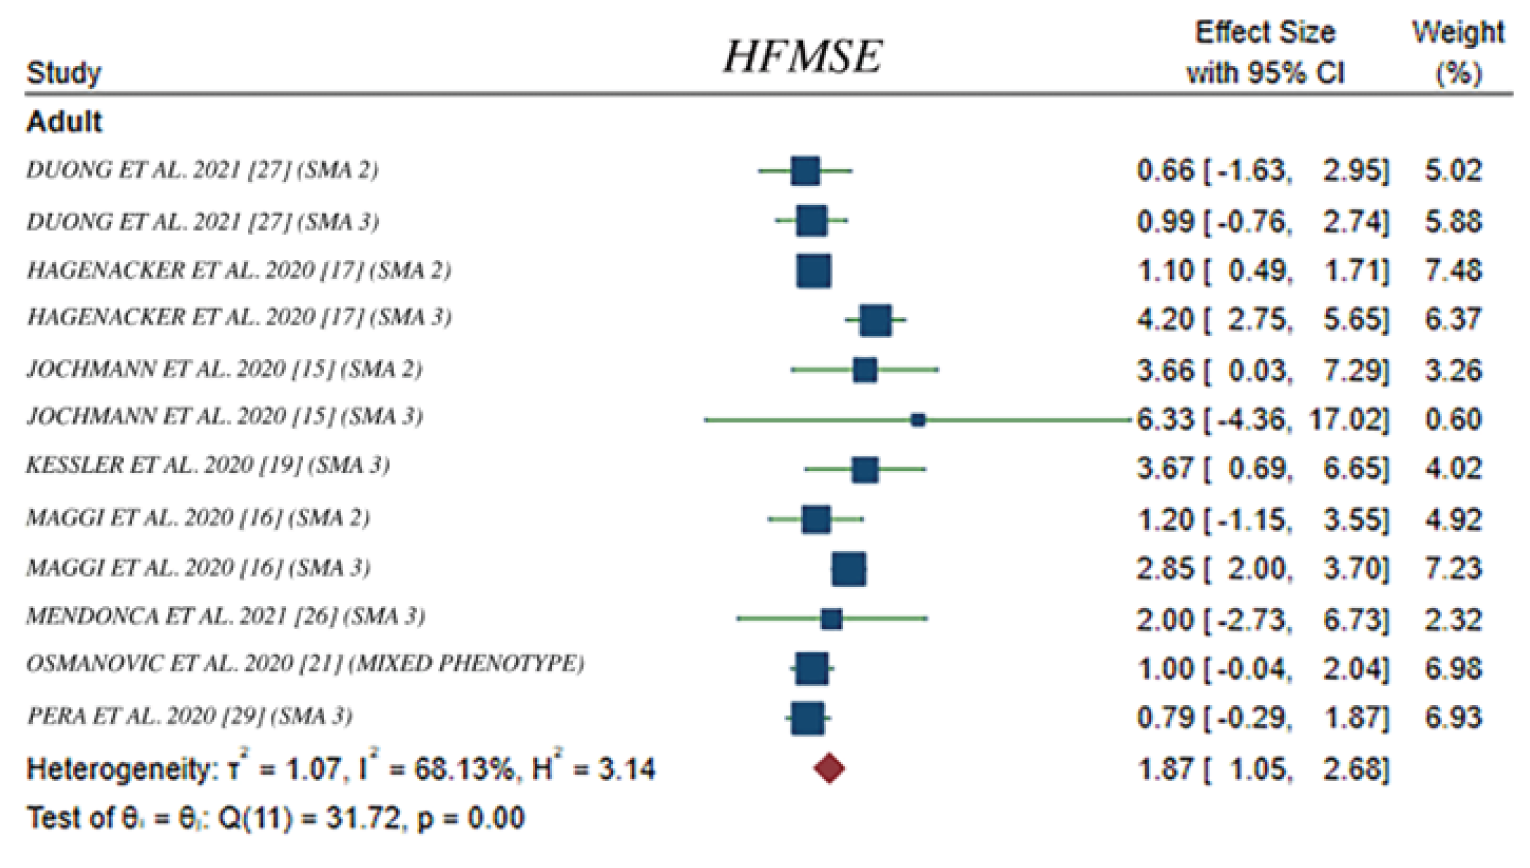 Forest plot of the meta-regression analysis for the mean change in HFMSE score in adults in included studies. A total of 8 studies were included. The pooled mean change in HFMSE score across studies was 1.87 points (95% CI, 1.05 to 2.68). In most cases, the 95% CI crossed the zero meridian.